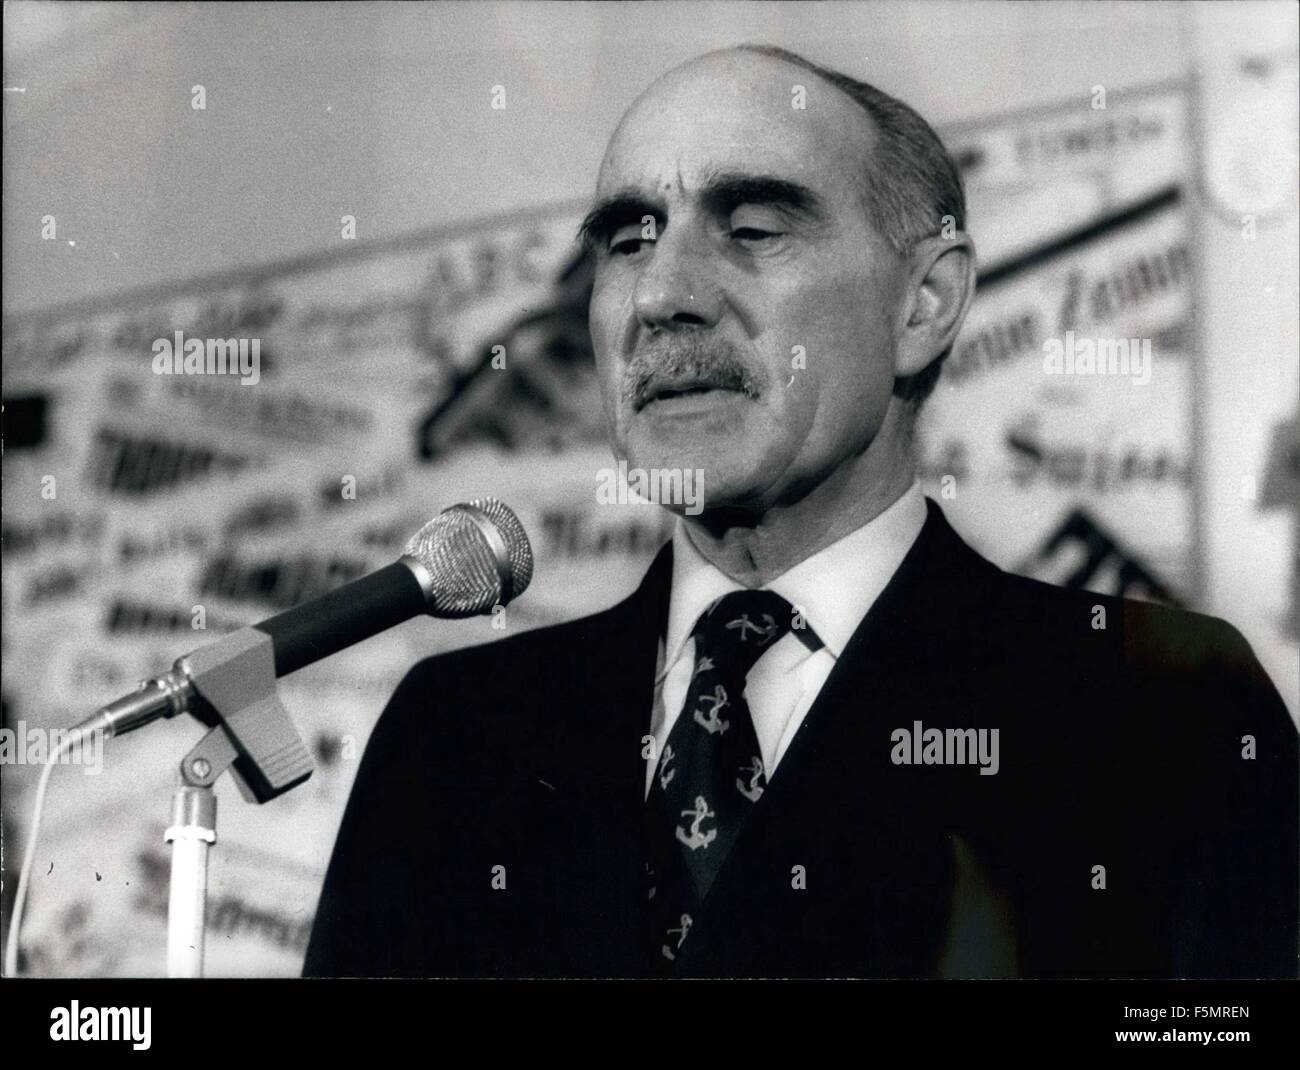 1972 - Admiral Gino Birindelli, 60, former commander of the Allied Forces of the South Europe and who was expelled from Malta by the Premier Dom Mintoff, is presenting himself candidate at the General electron schedule for the 7th of may under the flag of the NS.I. (Italian Social Movement as the Neofascist Party). Photo Shows Admiral Gino Birindelli speaking at the press conference. © Keystone Pictures USA/ZUMAPRESS.com/Alamy Live News Stock Photo